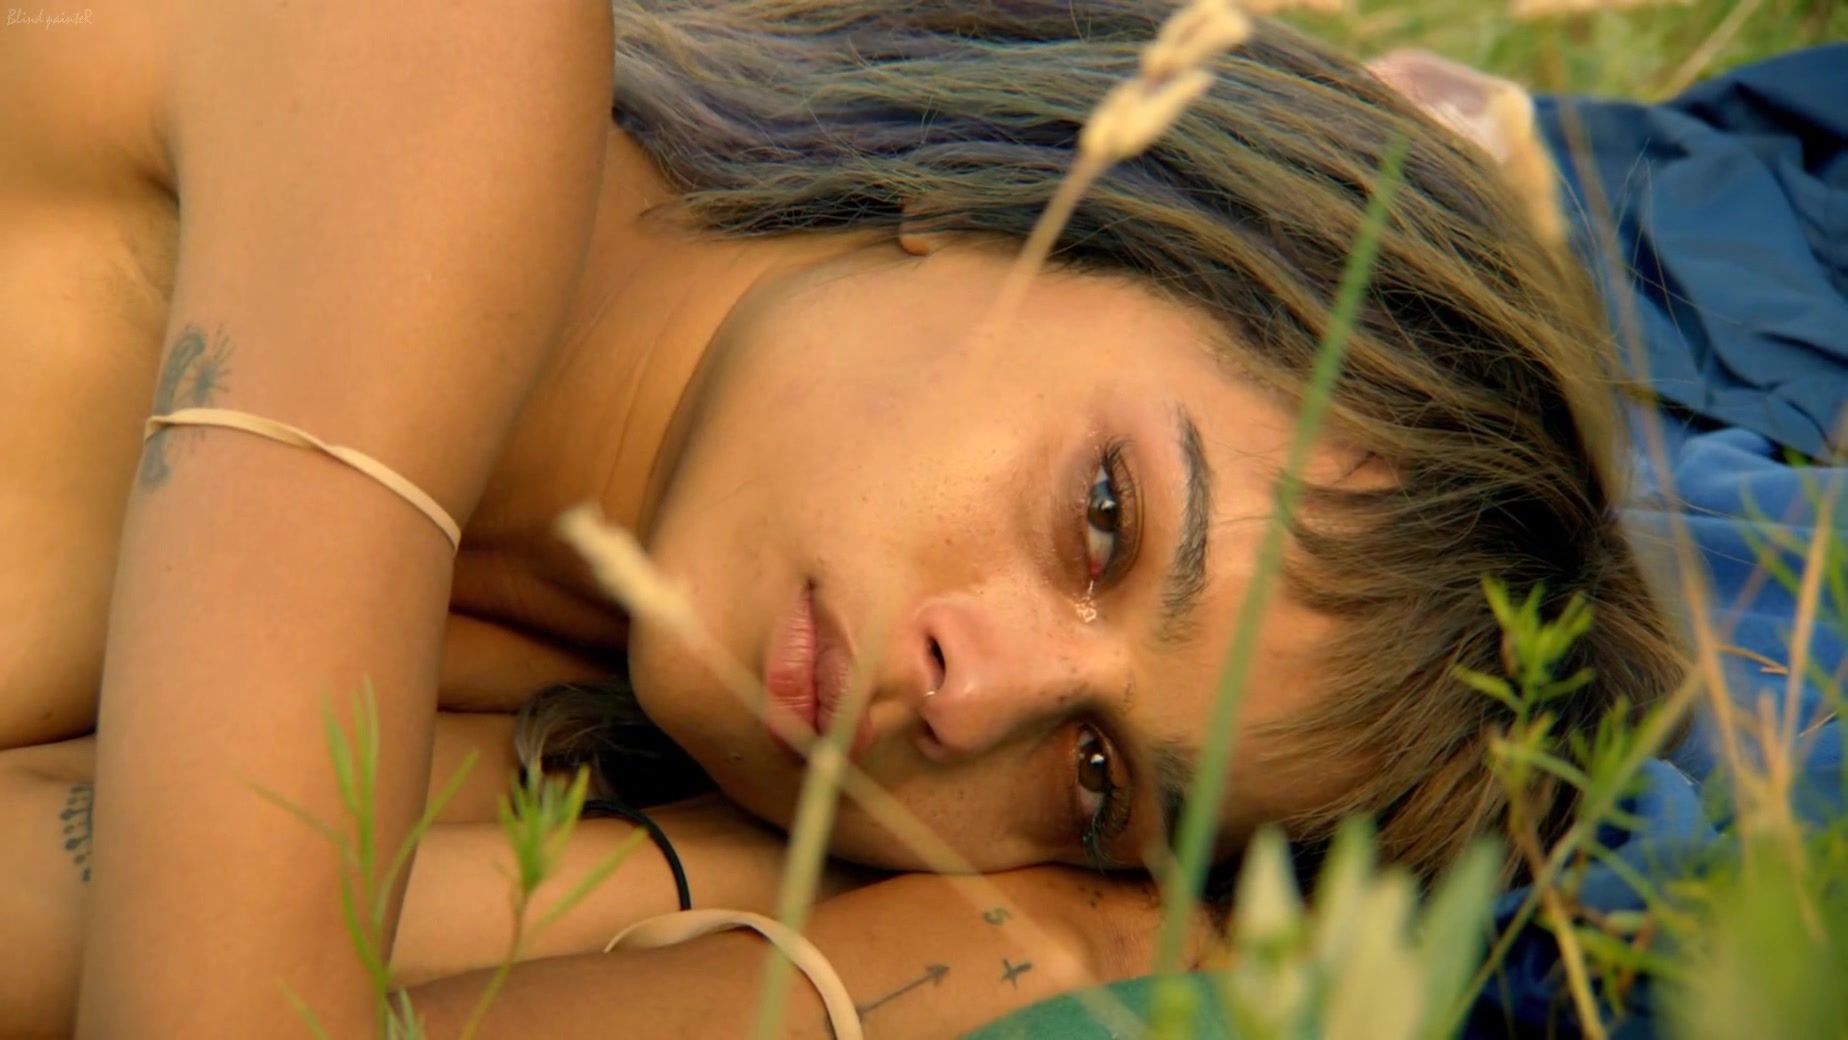 Real Amatuer Porn Zoe Kravitz - The Road Within (2014) T Girl